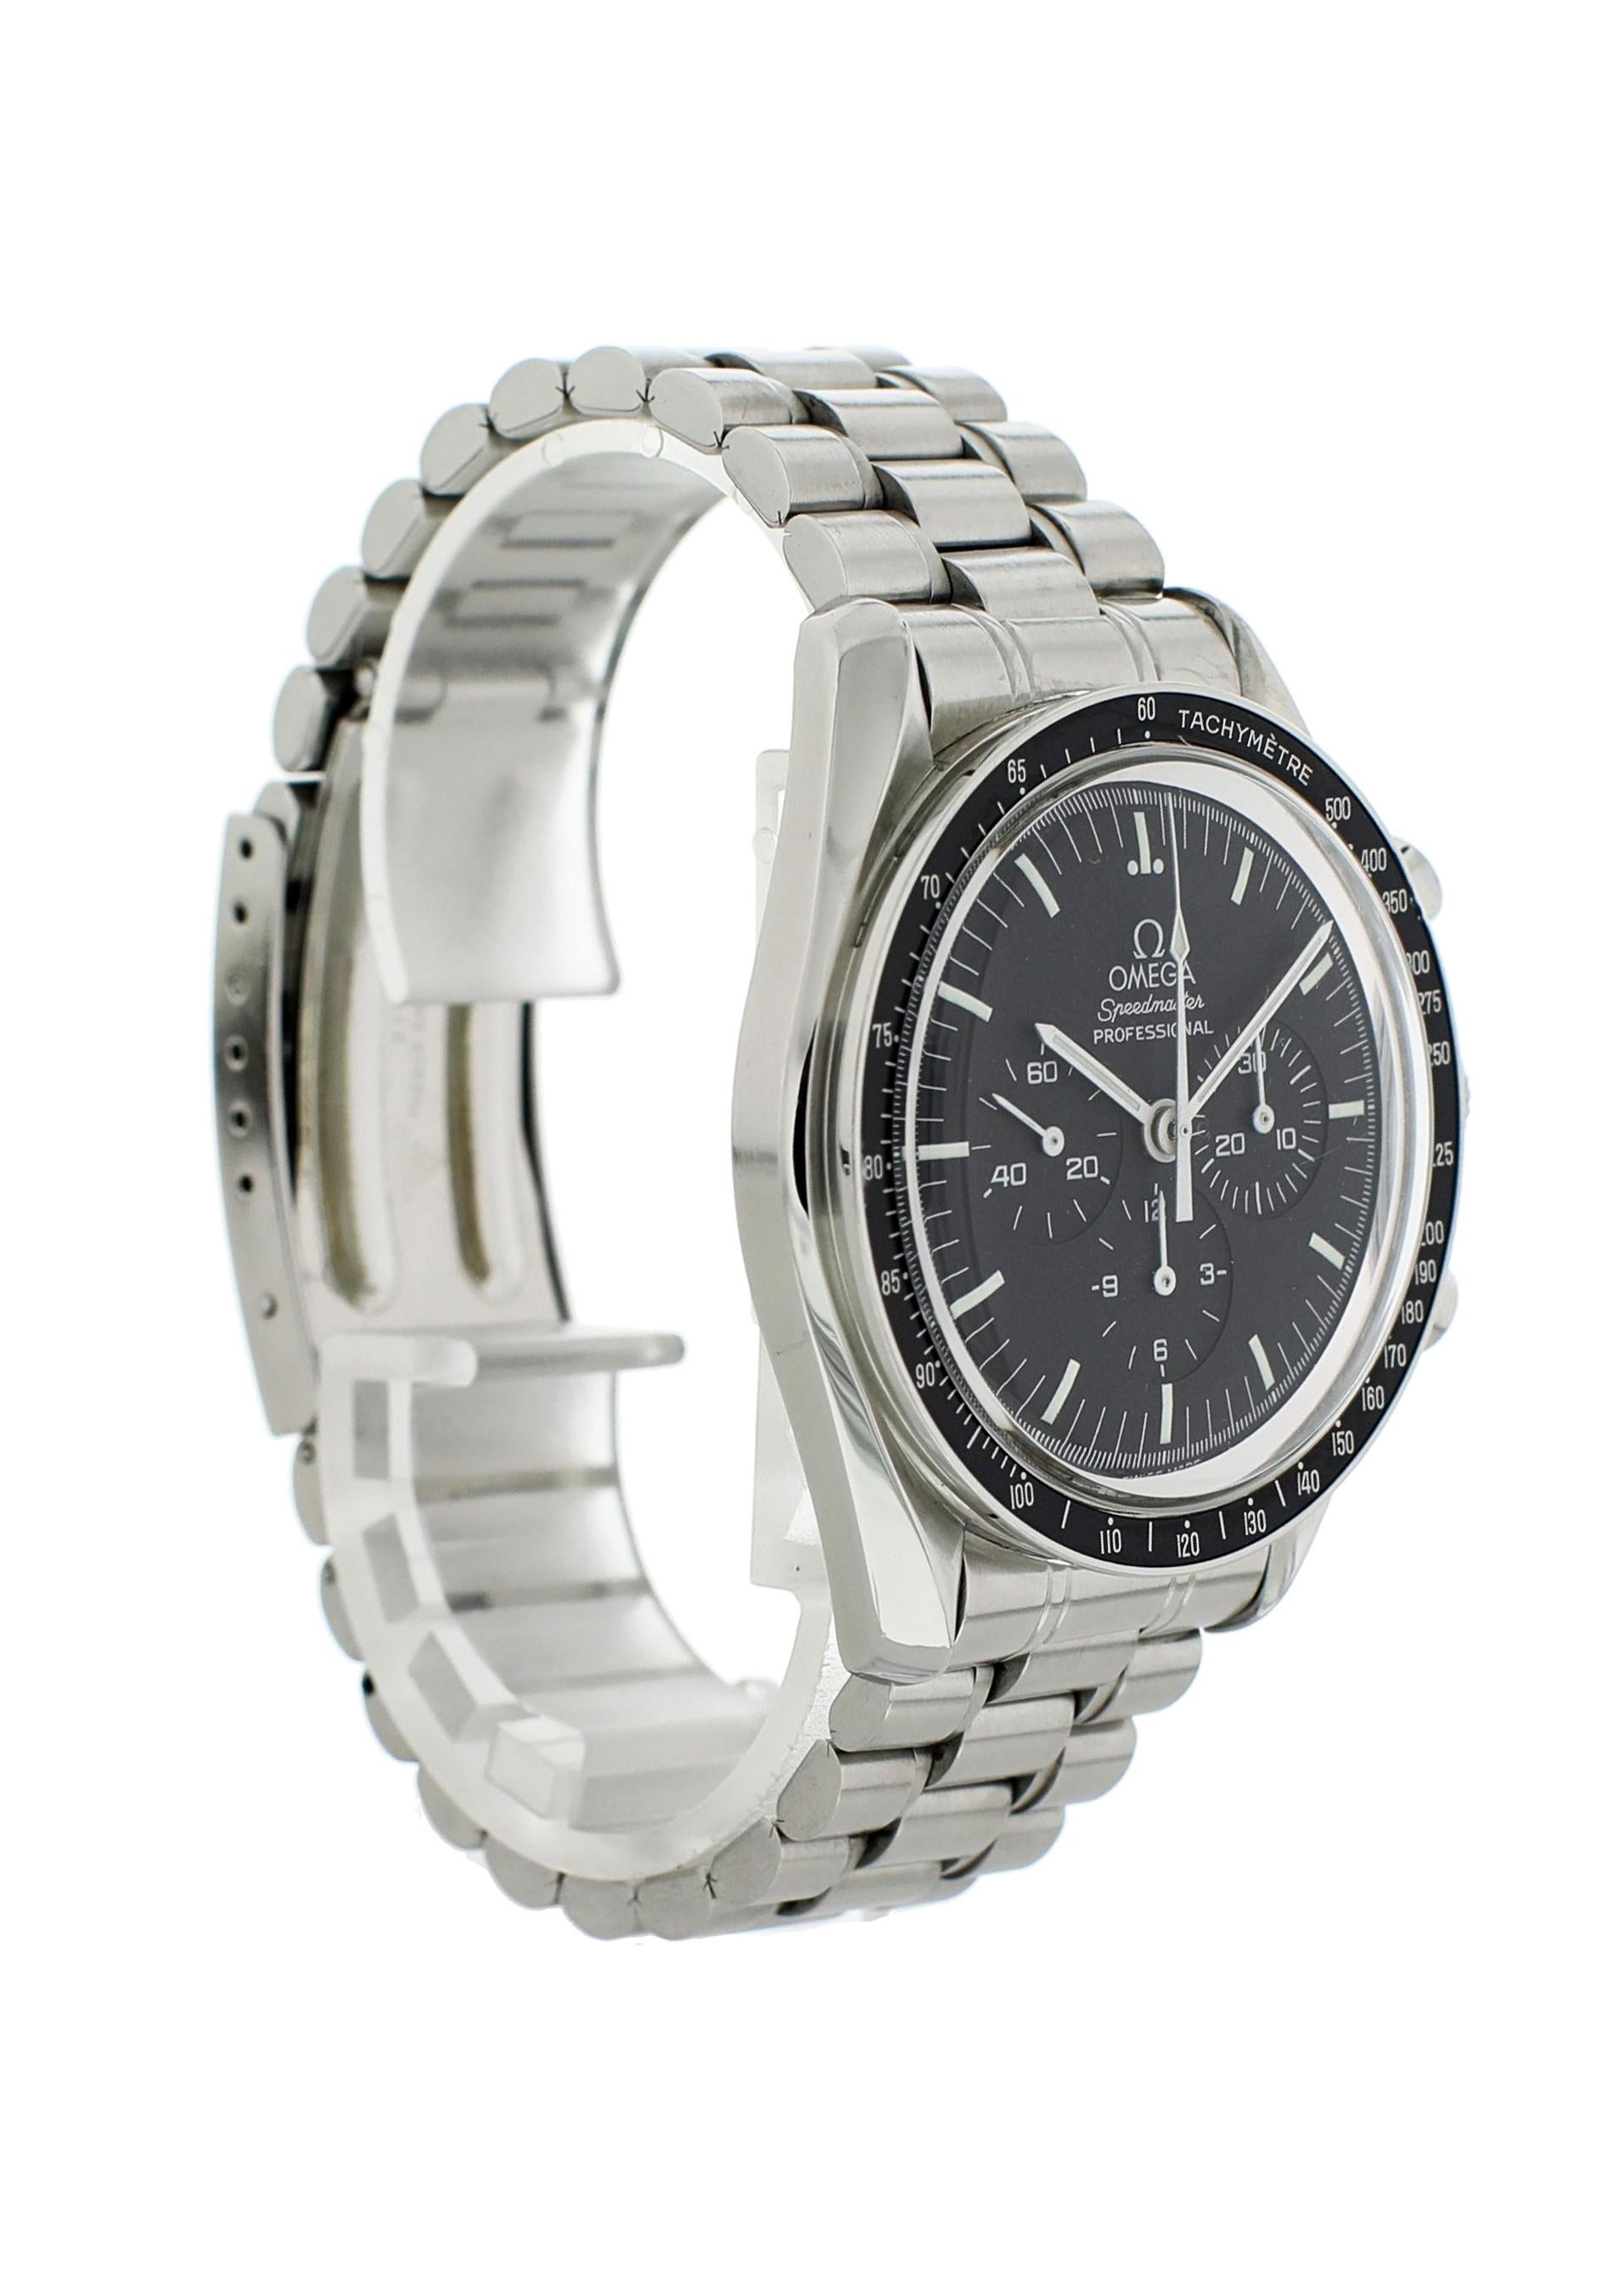 Omega Speedmaster Moonwatch 3590.50.00 Men's Watch In Excellent Condition For Sale In New York, NY